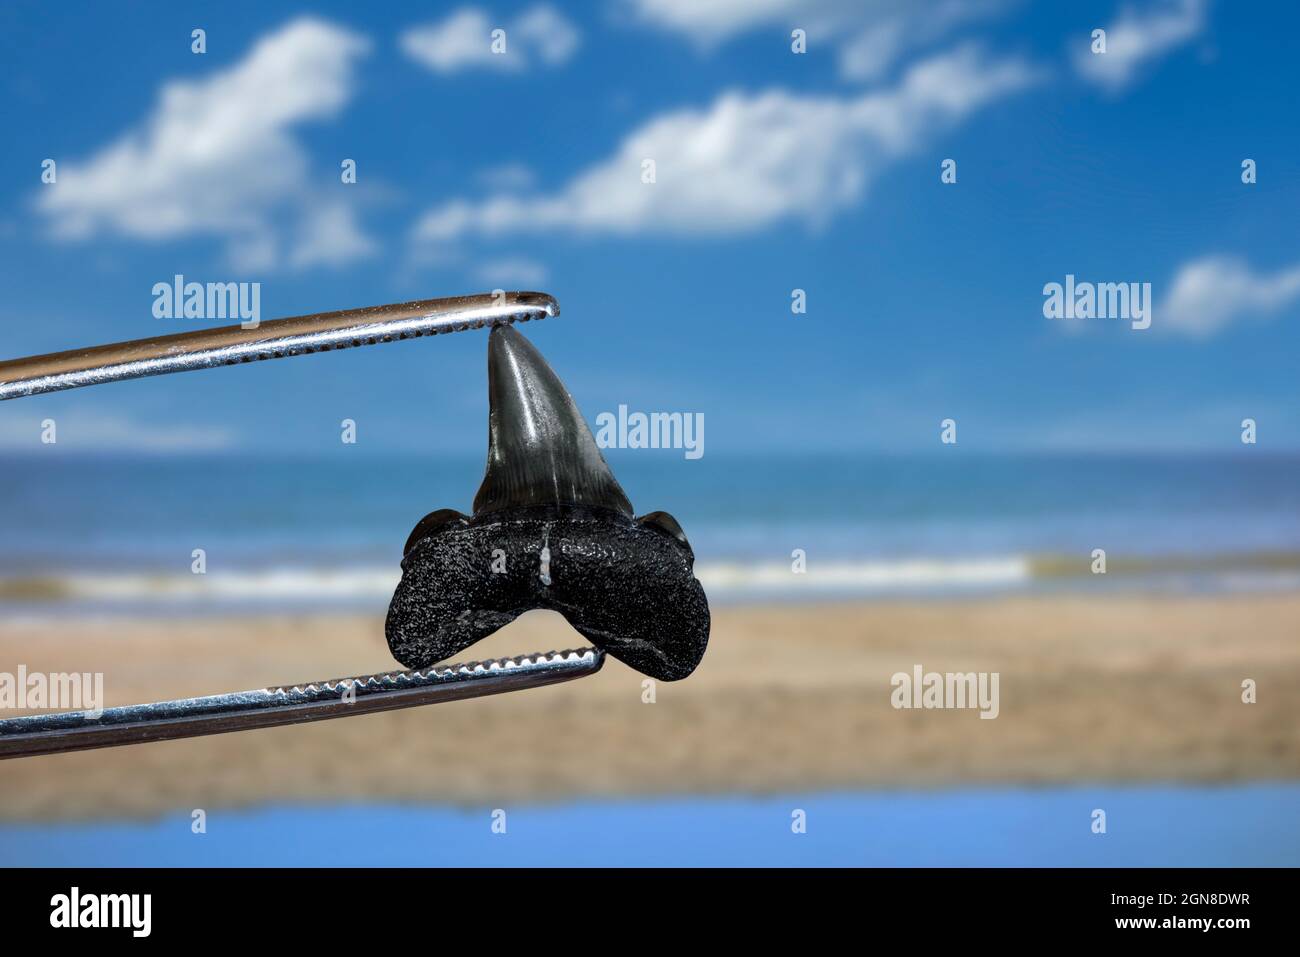 Tweezers holding shark's tooth fossil on beach of the Zwin, known for its fossilized shark teeth along the North Sea coast at Knokke-Heist, Belgium Stock Photo